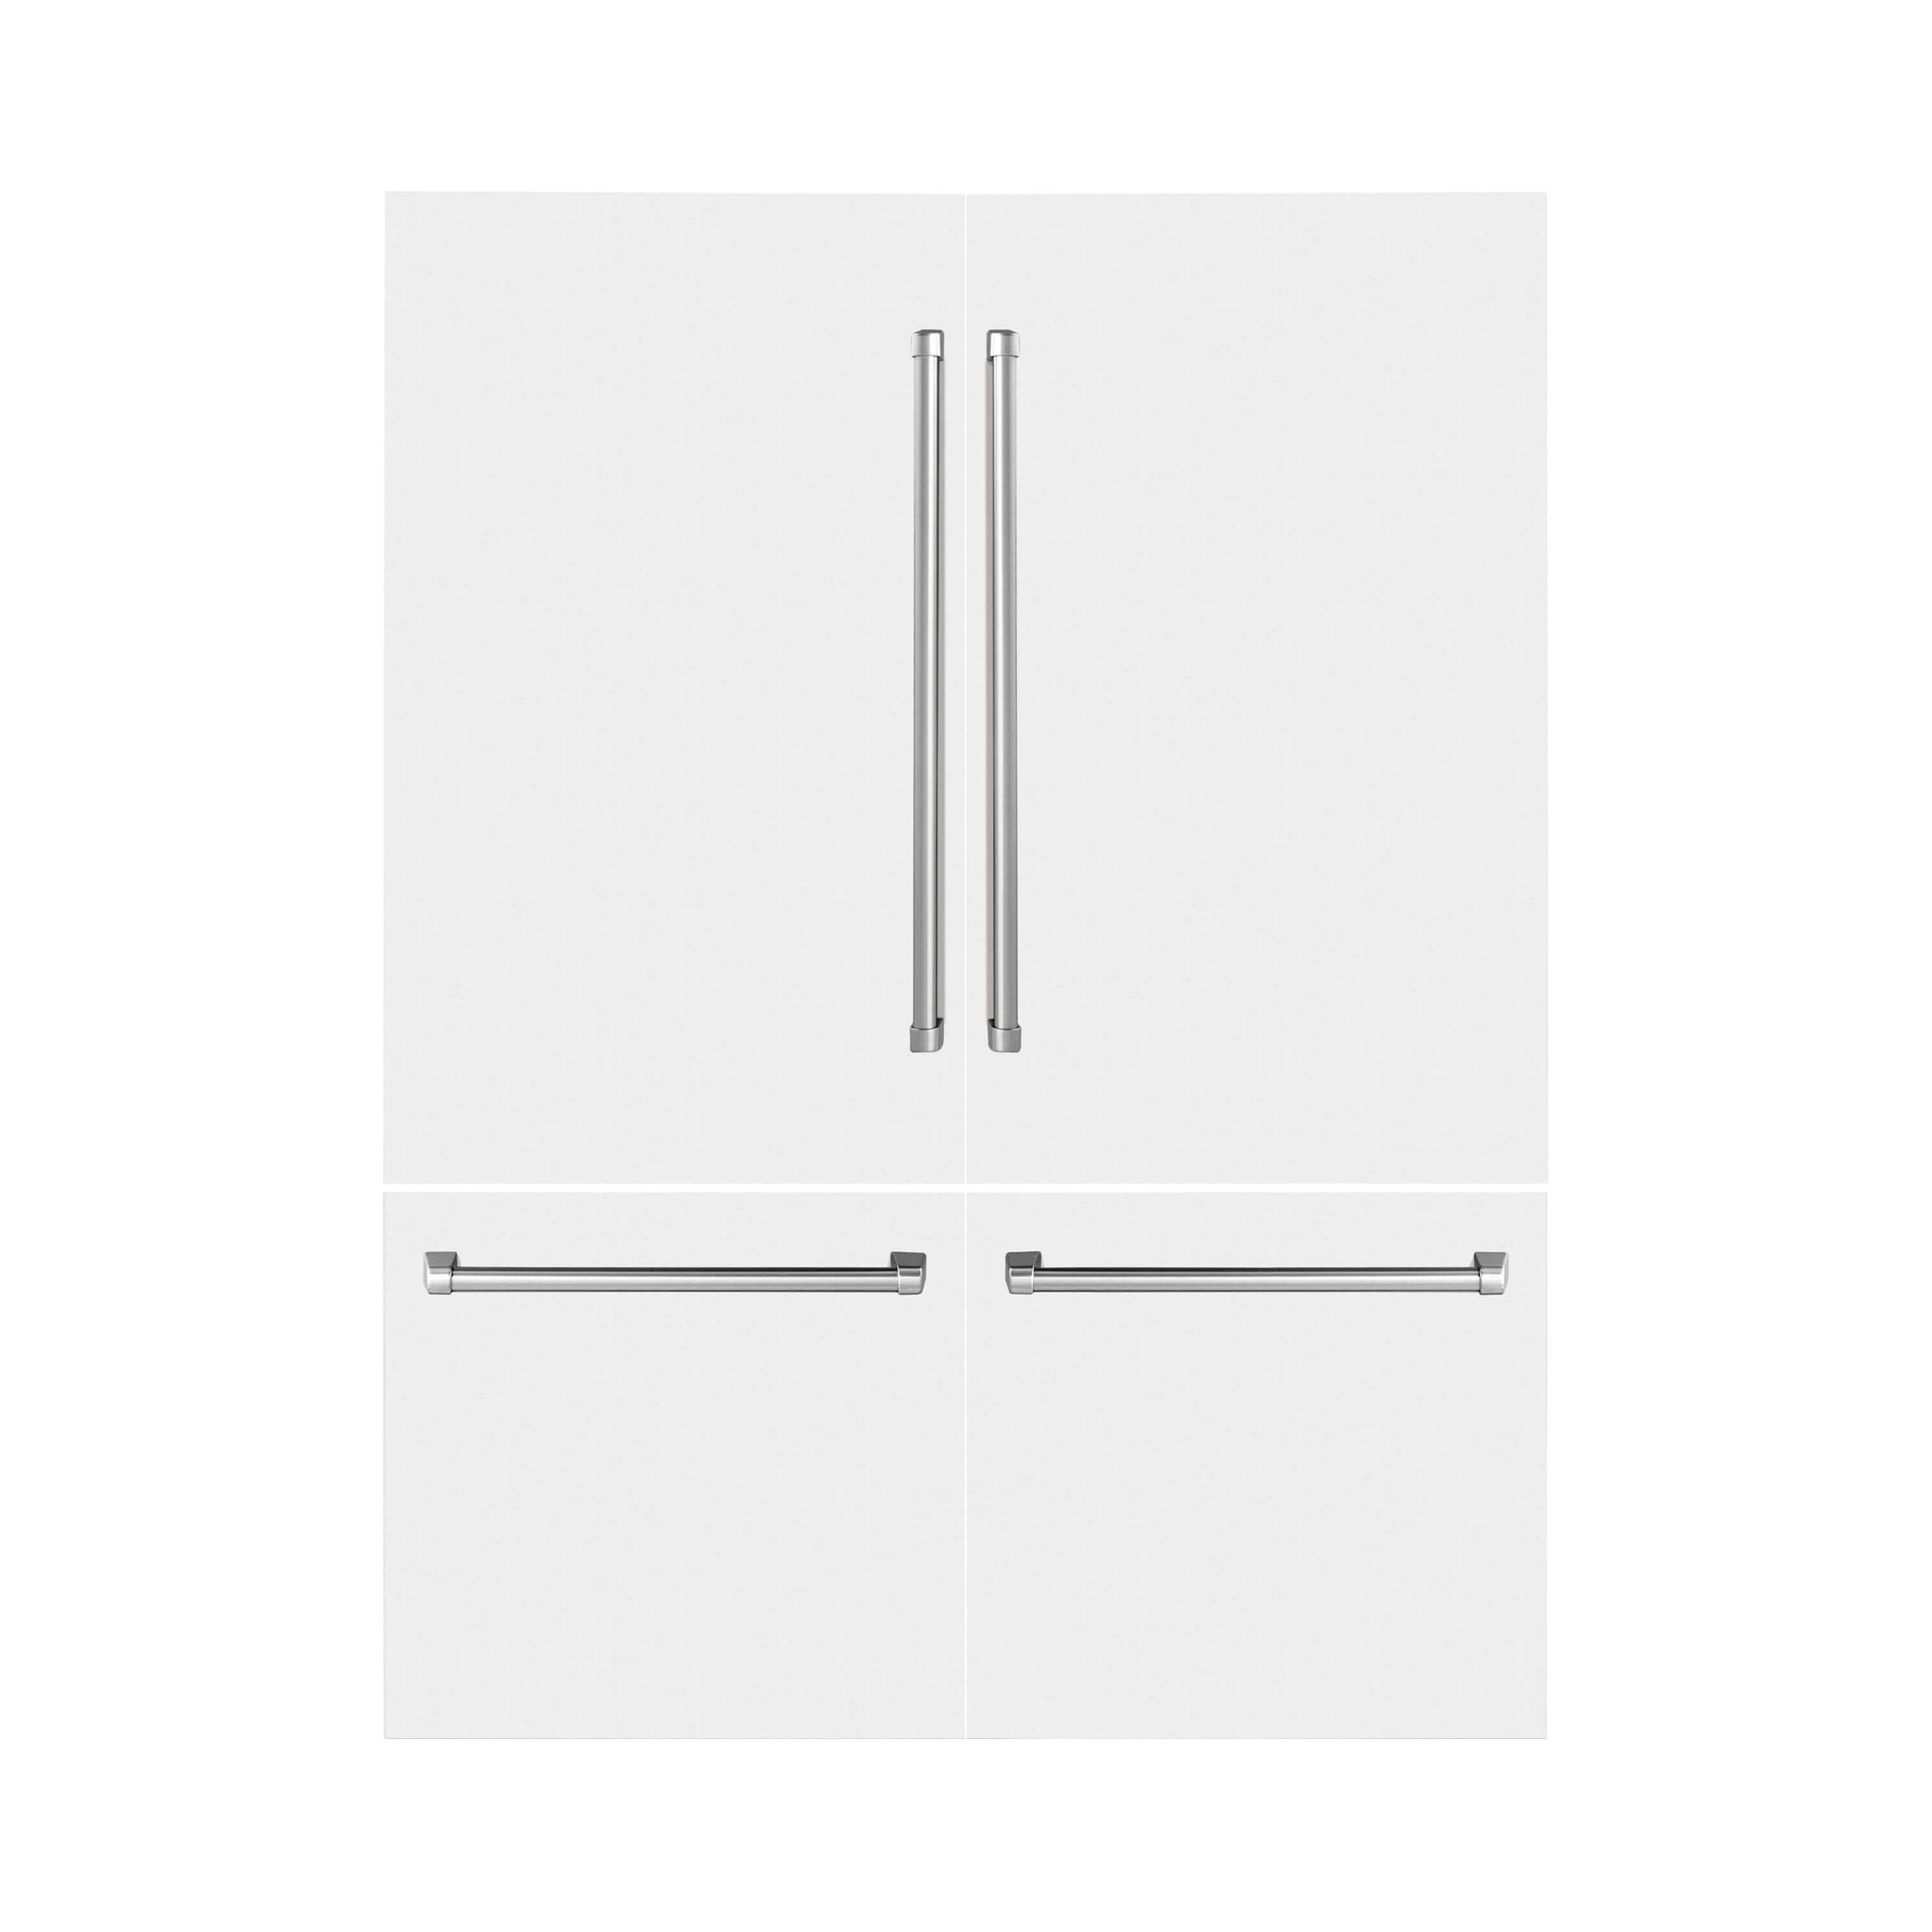 Panels & Handles Only- ZLINE 60 in. Refrigerator Panels in White Matte for a 60 in. Built-in Refrigerator (RPBIV-WM-60)